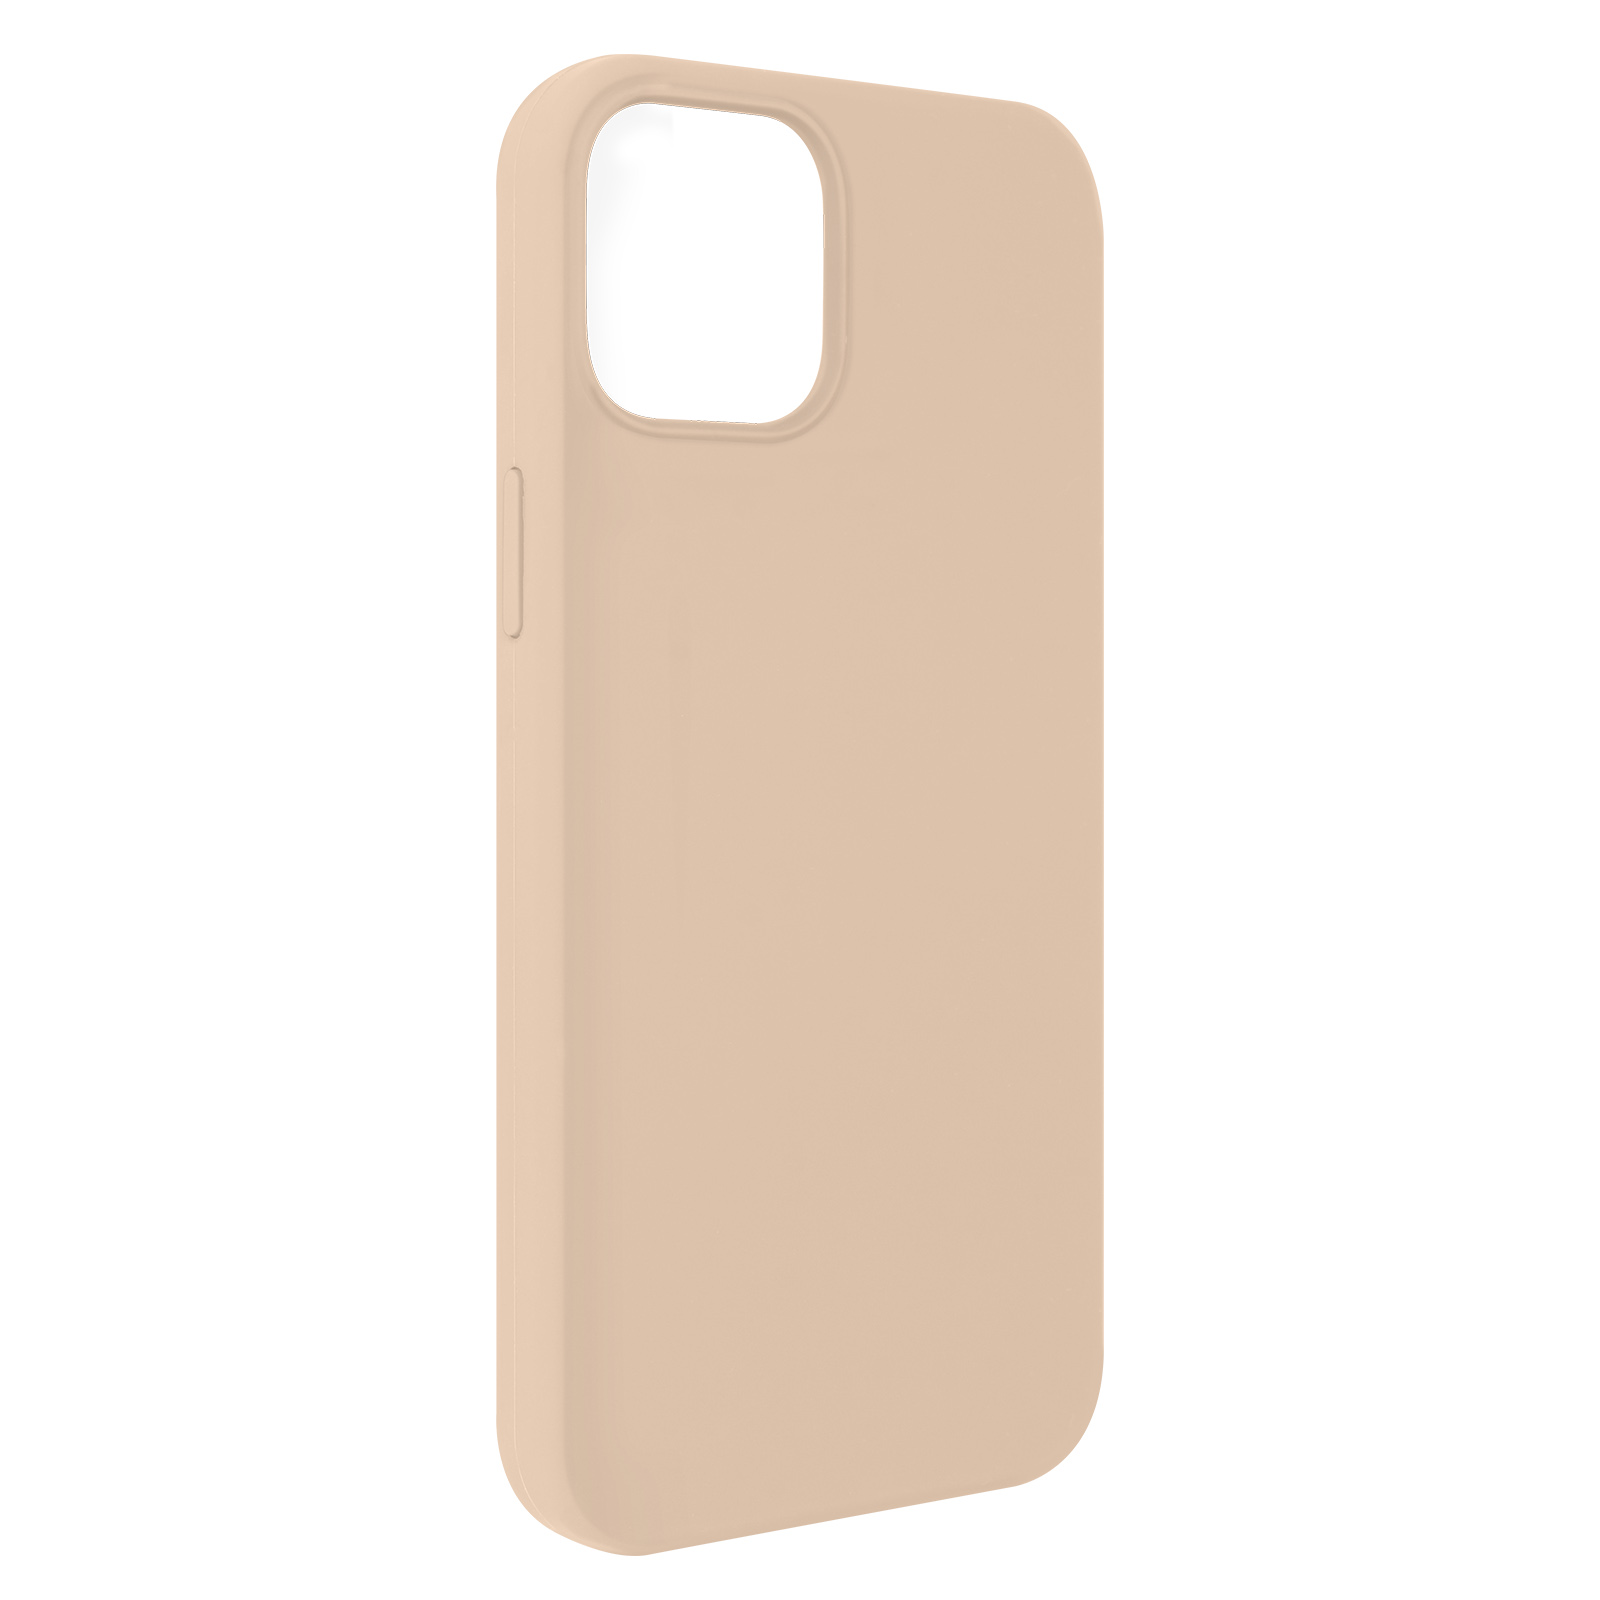 Likid Apple, Rosegold AVIZAR Series, iPhone Backcover, 13,